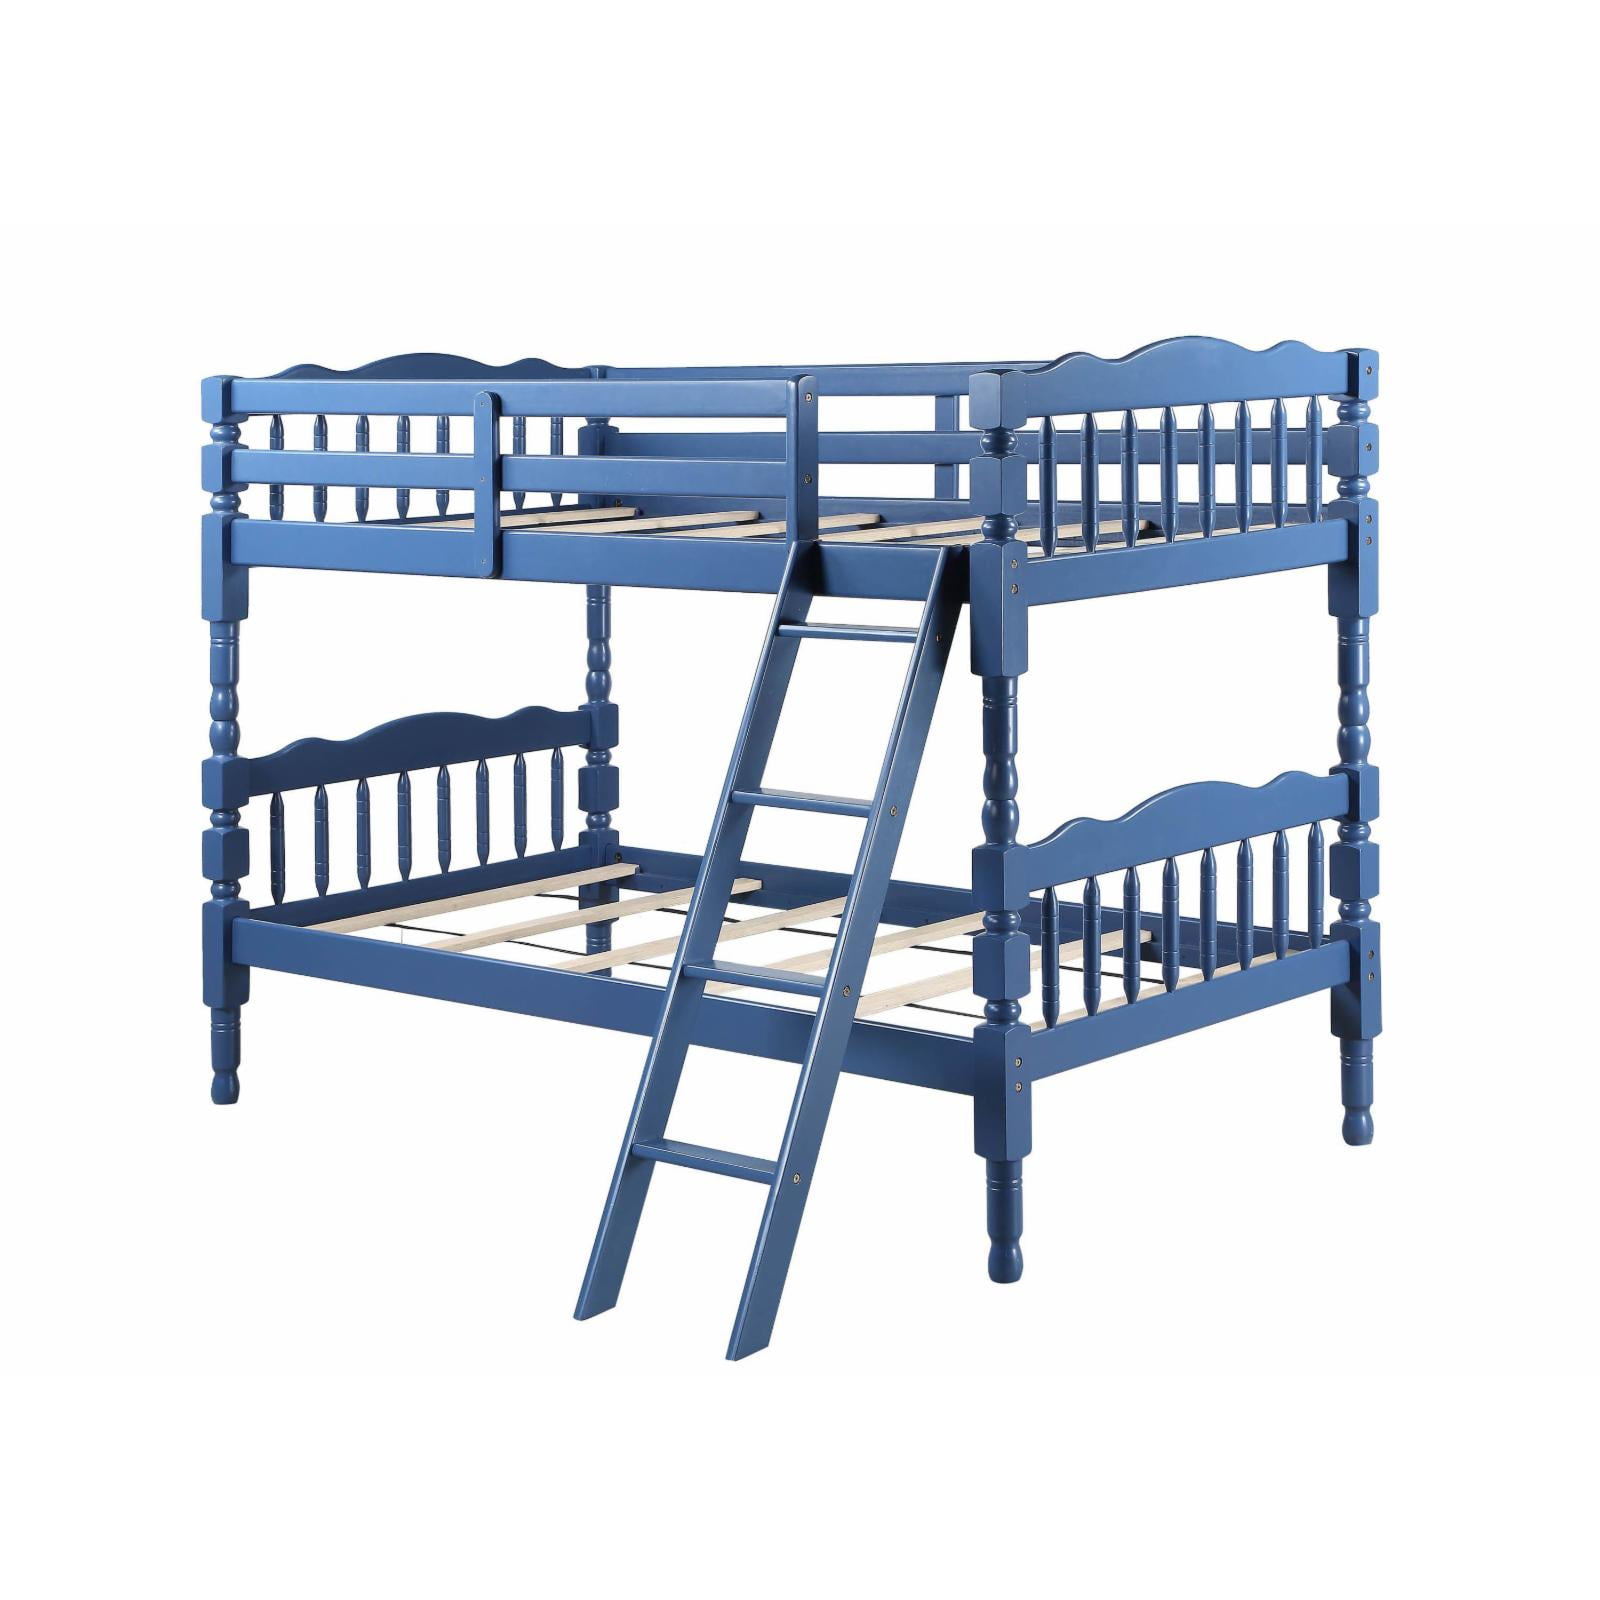 Picture of Acme Furniture BD00865 82 x 43 x 60 in. Homestead Bunk Bed, Dark Blue - Twin Size